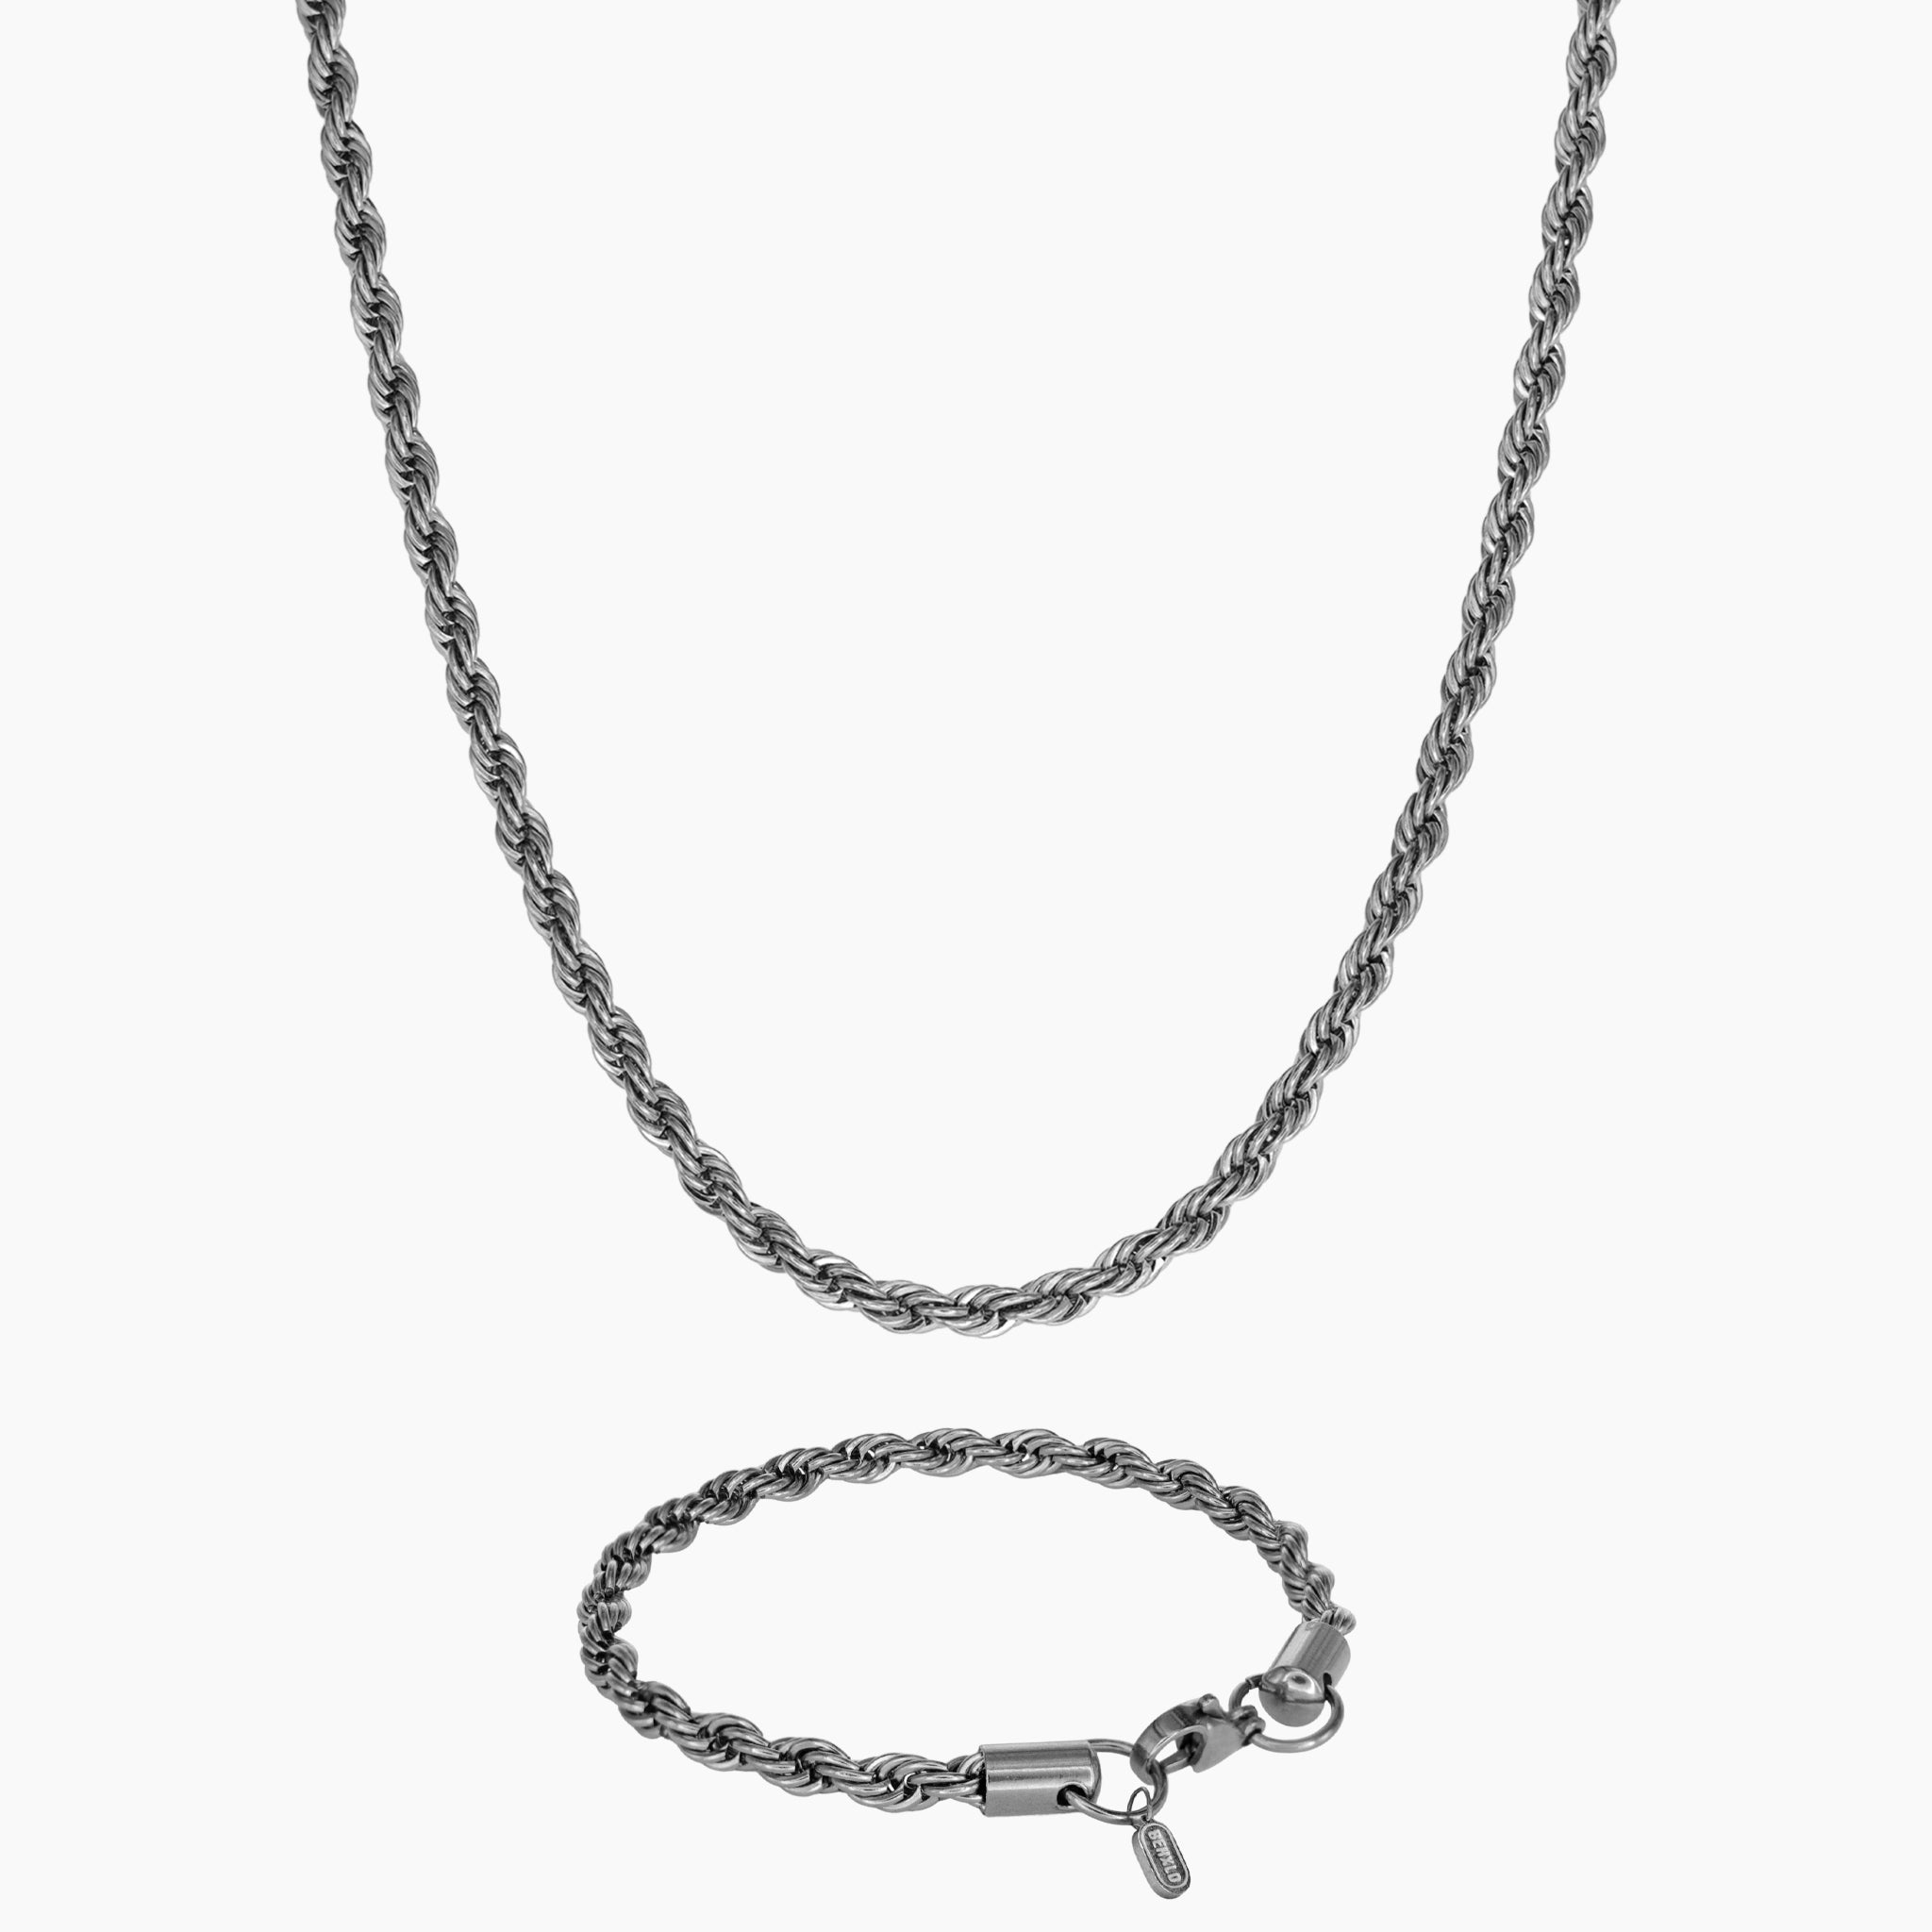 5mm Twisted Rope Chain Set - Silver